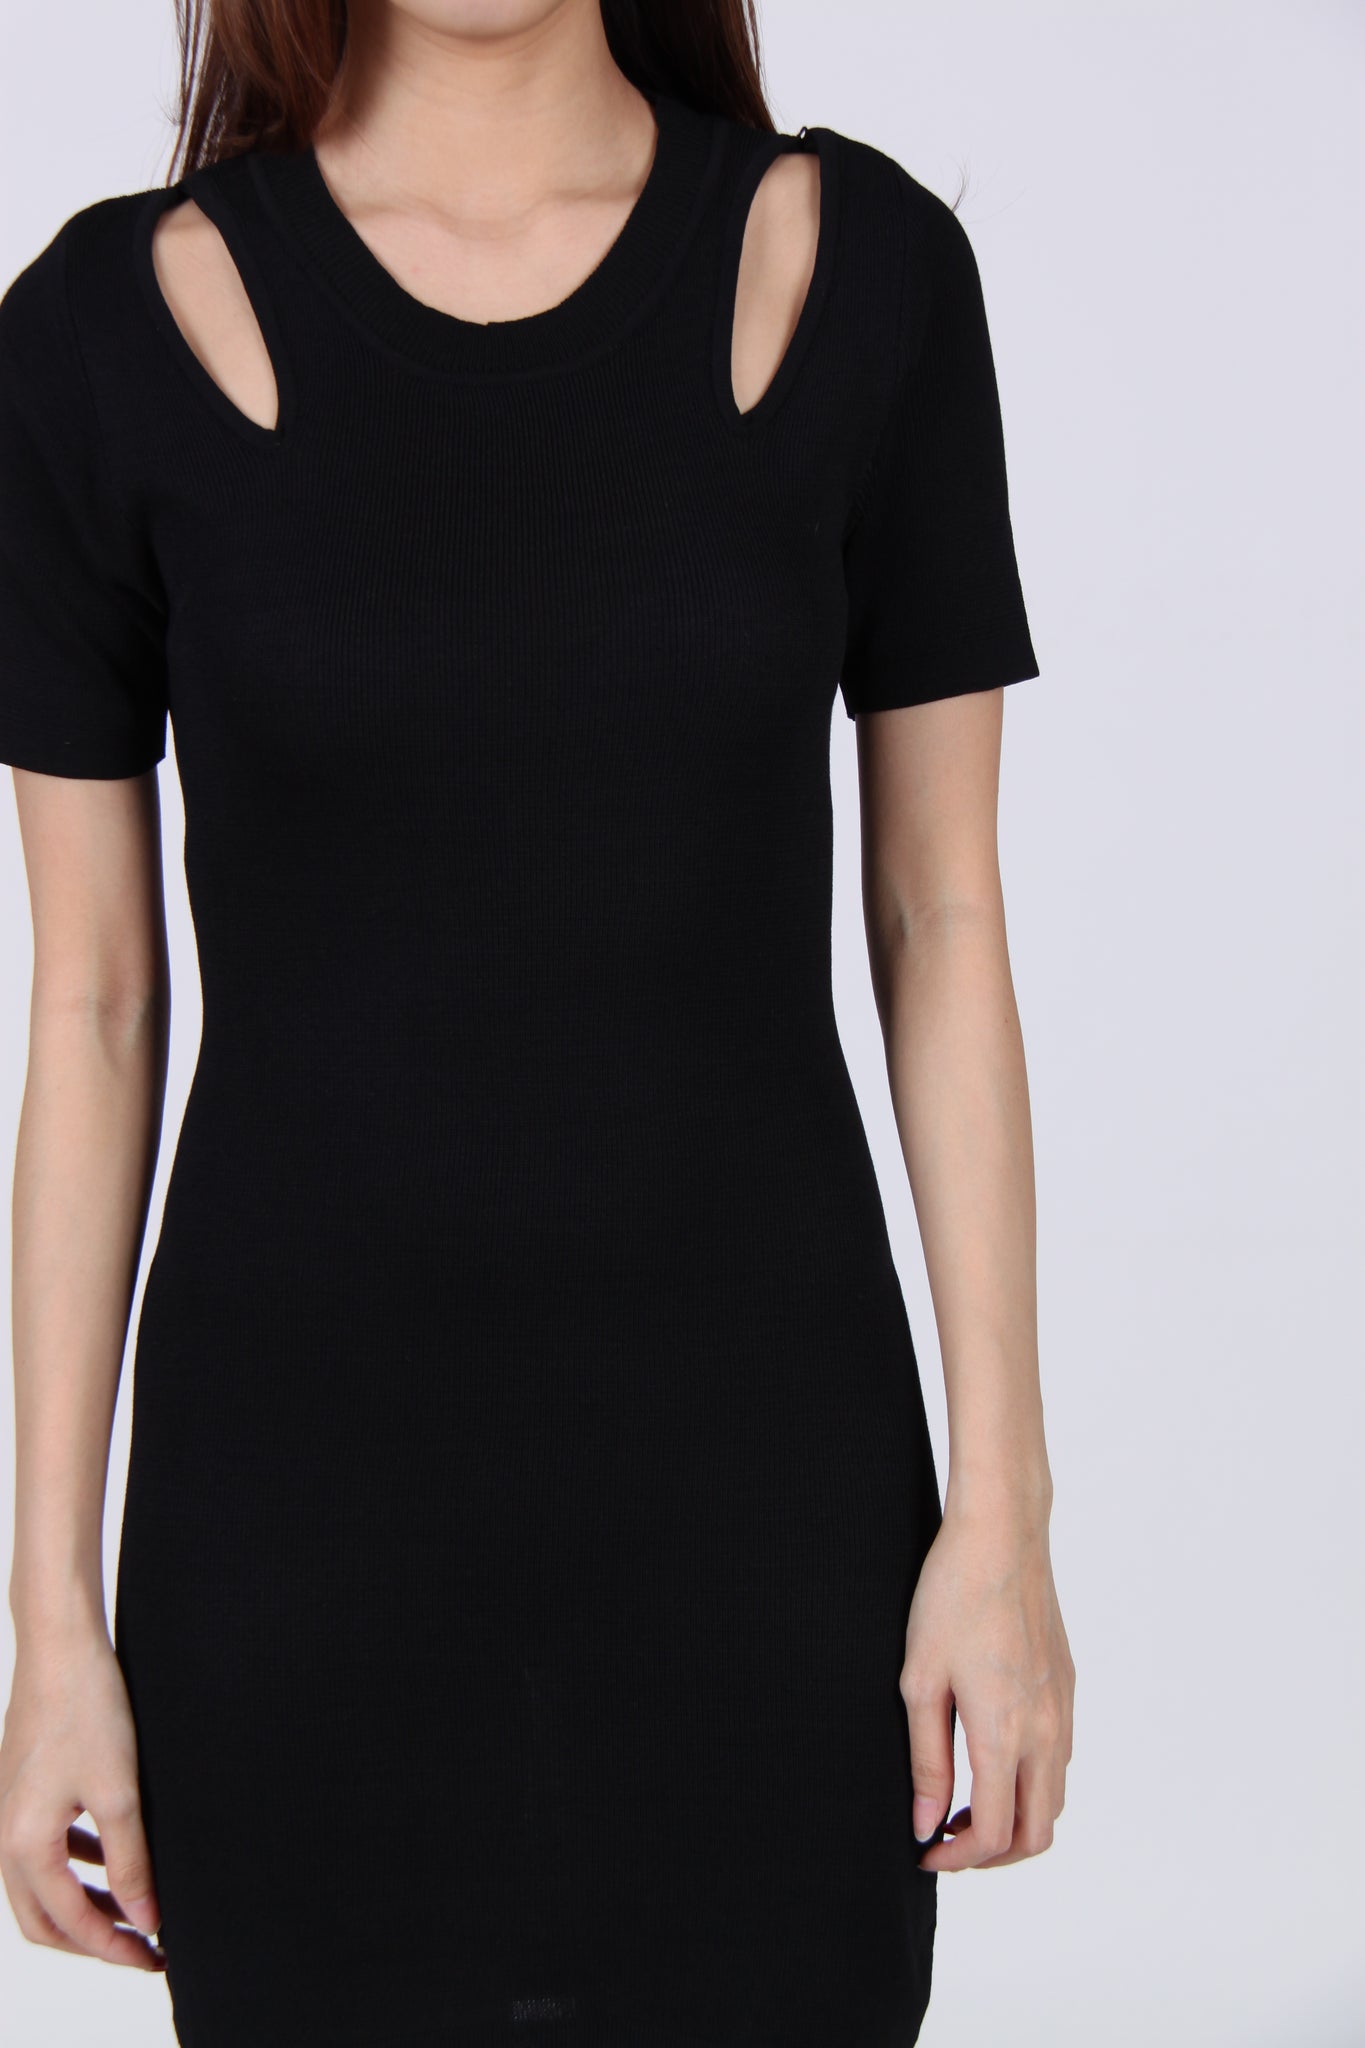 Sleeve Shoulder Back Cut-Out Bodycon Dress in Black